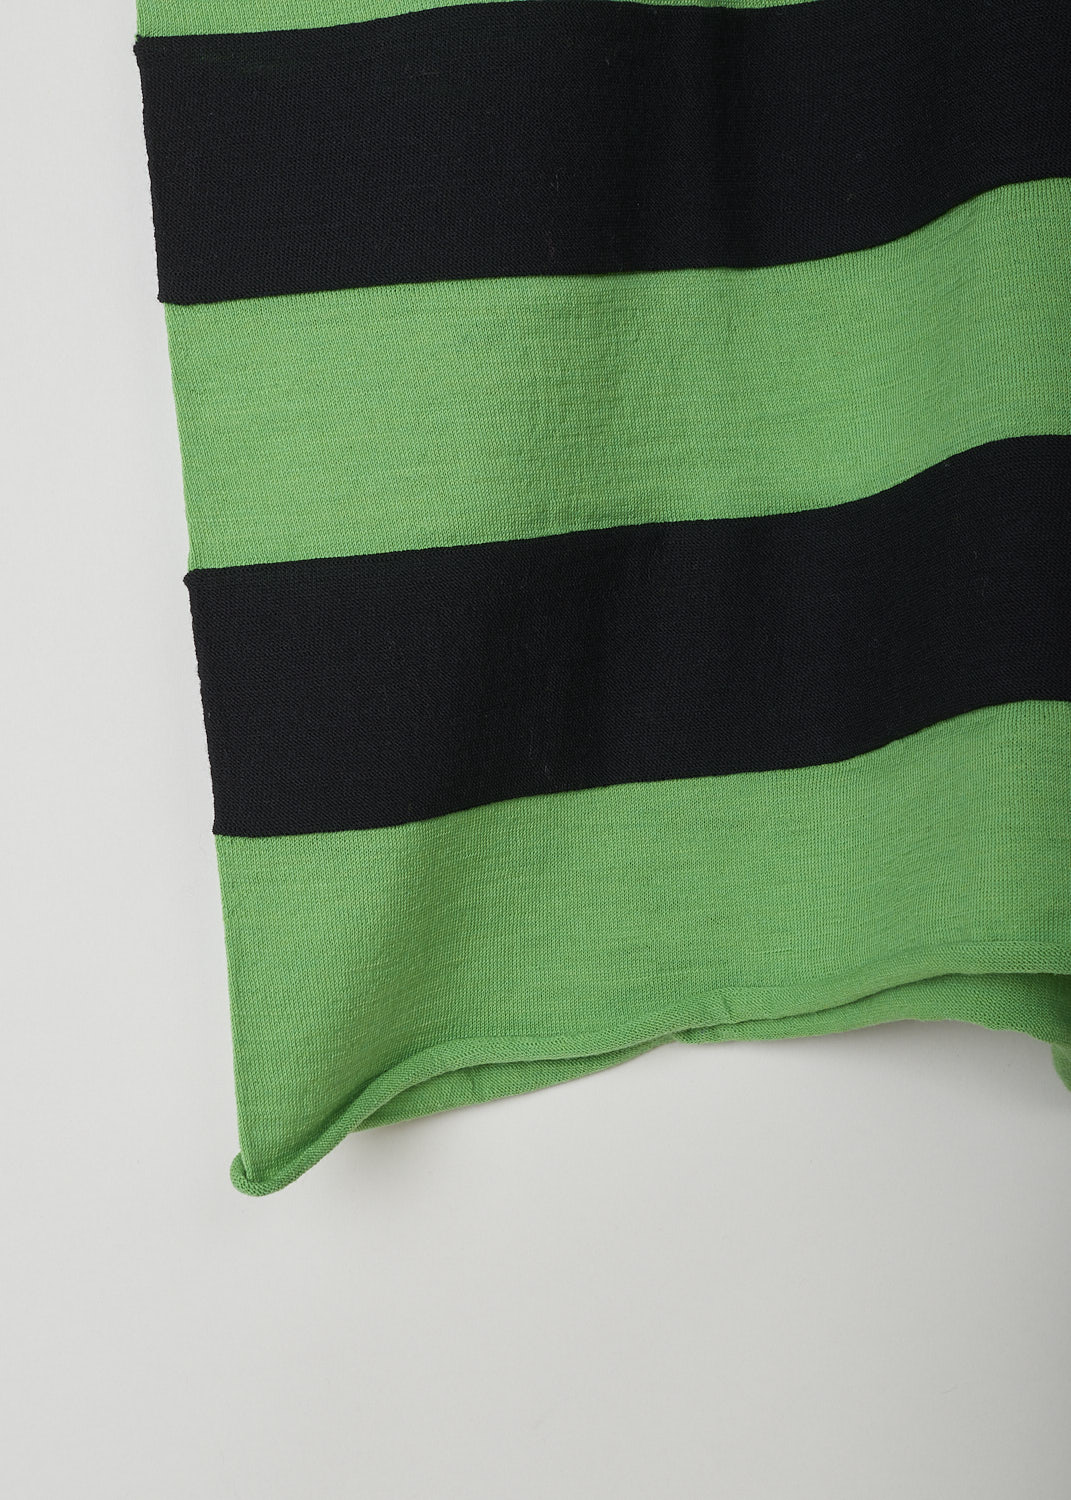 SOFIE Dâ€™HOORE, GREEN AND BLACK STRIPED VEST, MODA_YFIMBI_GREEN_BLACK, Green, Black, Detail 1, This green and black striped wool vest has a ribbed V-neckline. That same ribbed finish can be found around the armholes. The vest has a rolled hemline. The vest has a wider silhouette. 
